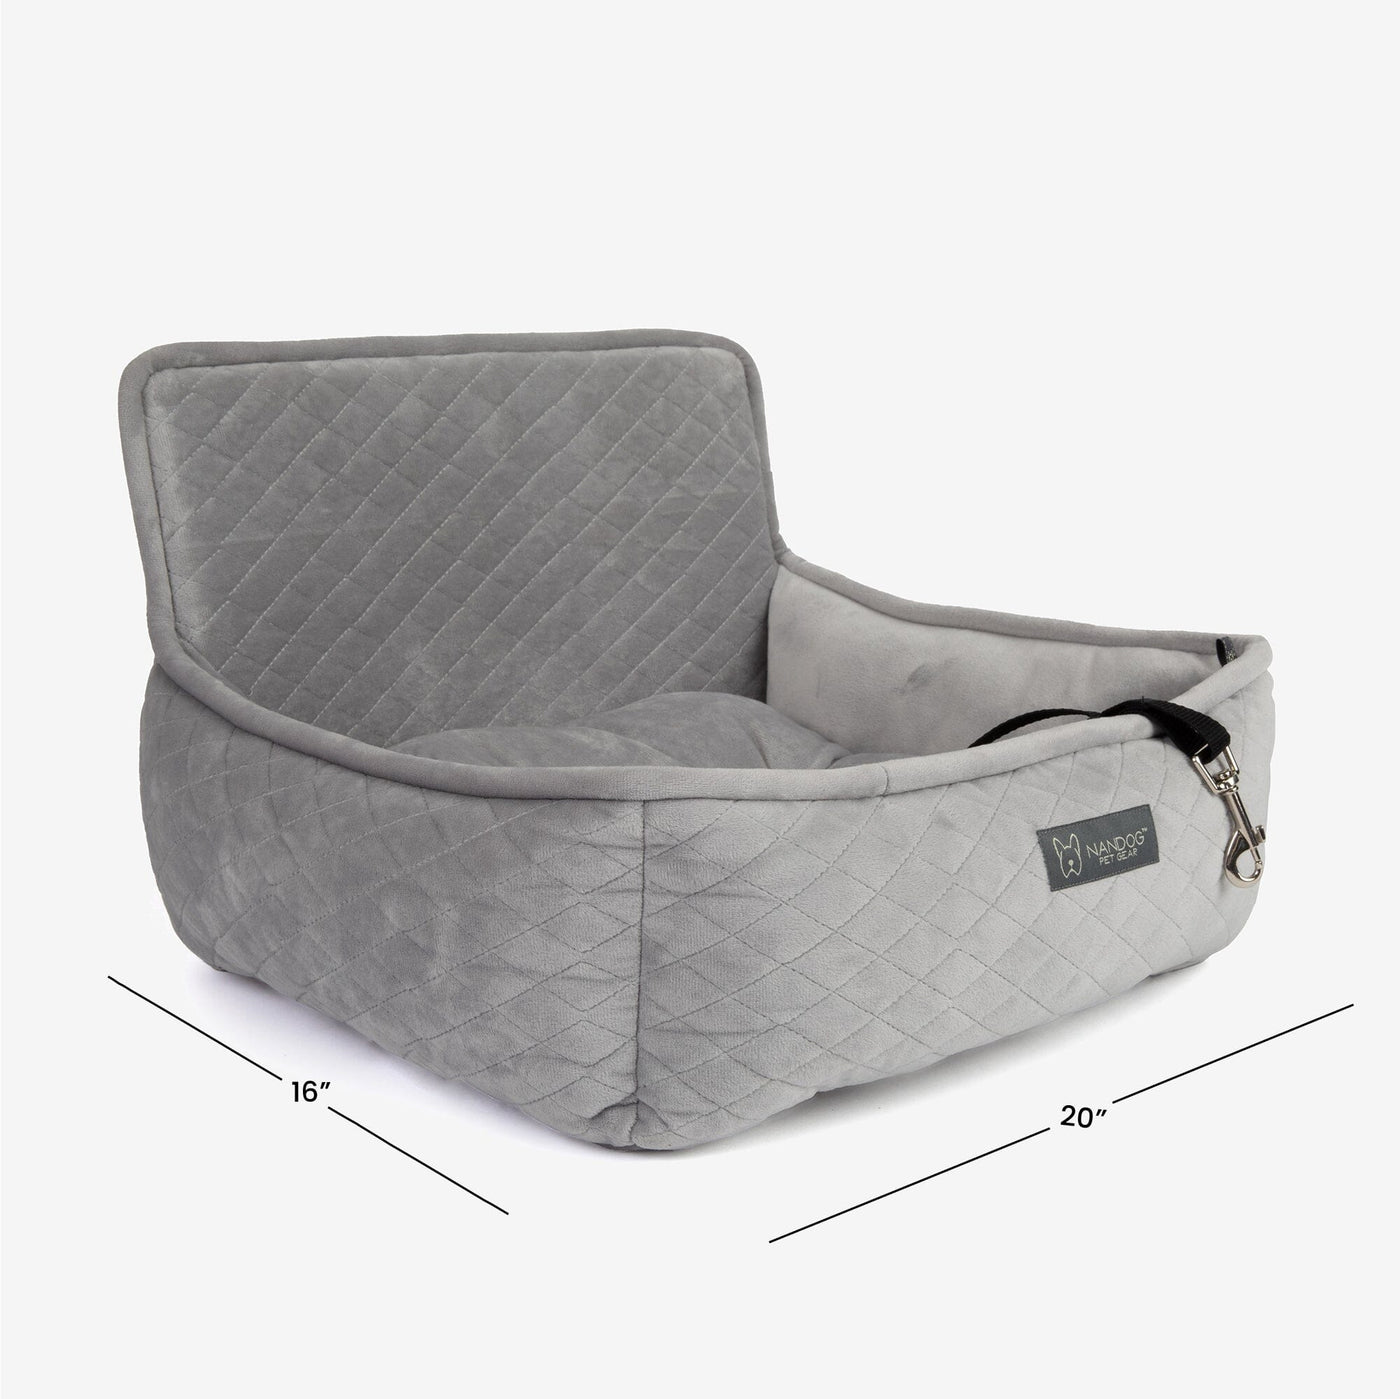 Dog Car Seat Quilted - Small/Light Gray